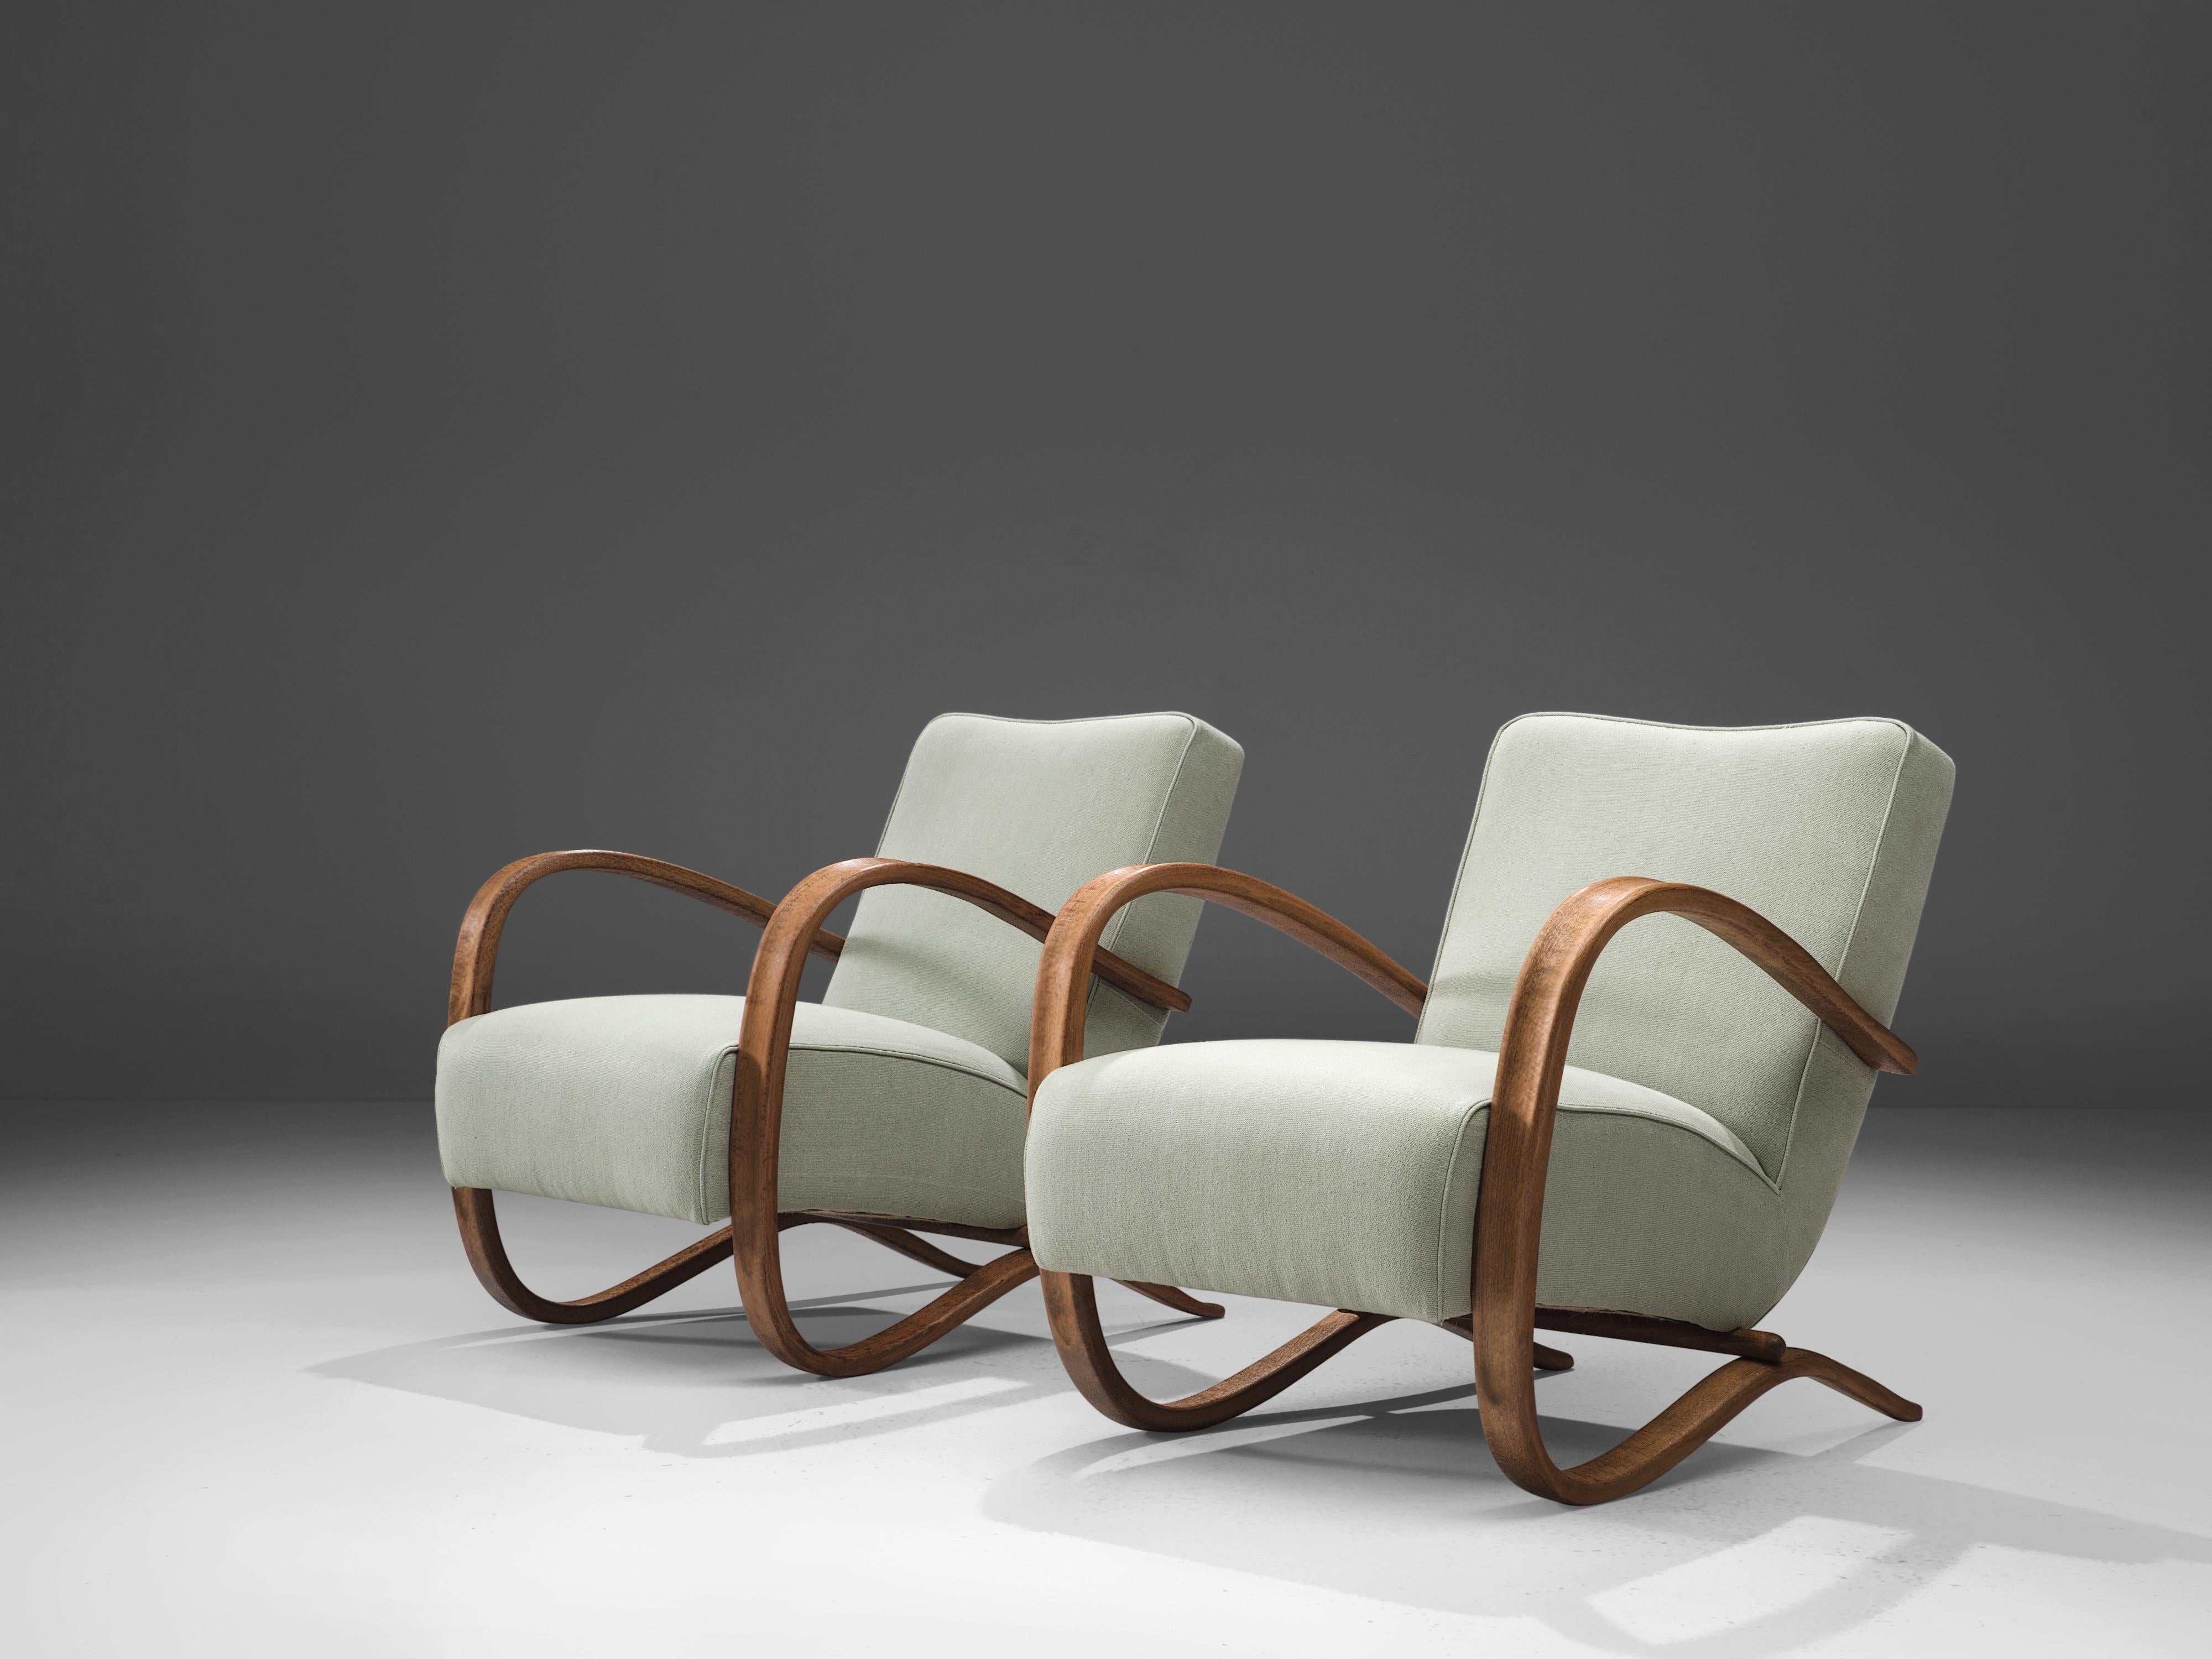 Jindrich Halabala, customizable lounge chairs, wood, fabric, Czech Republic, 1930s.

Extraordinary easy chairs with hand-crafted upholstery. These chairs have a very dynamic and abundant appearance. Beautifully curved armrests add a dynamic appeal